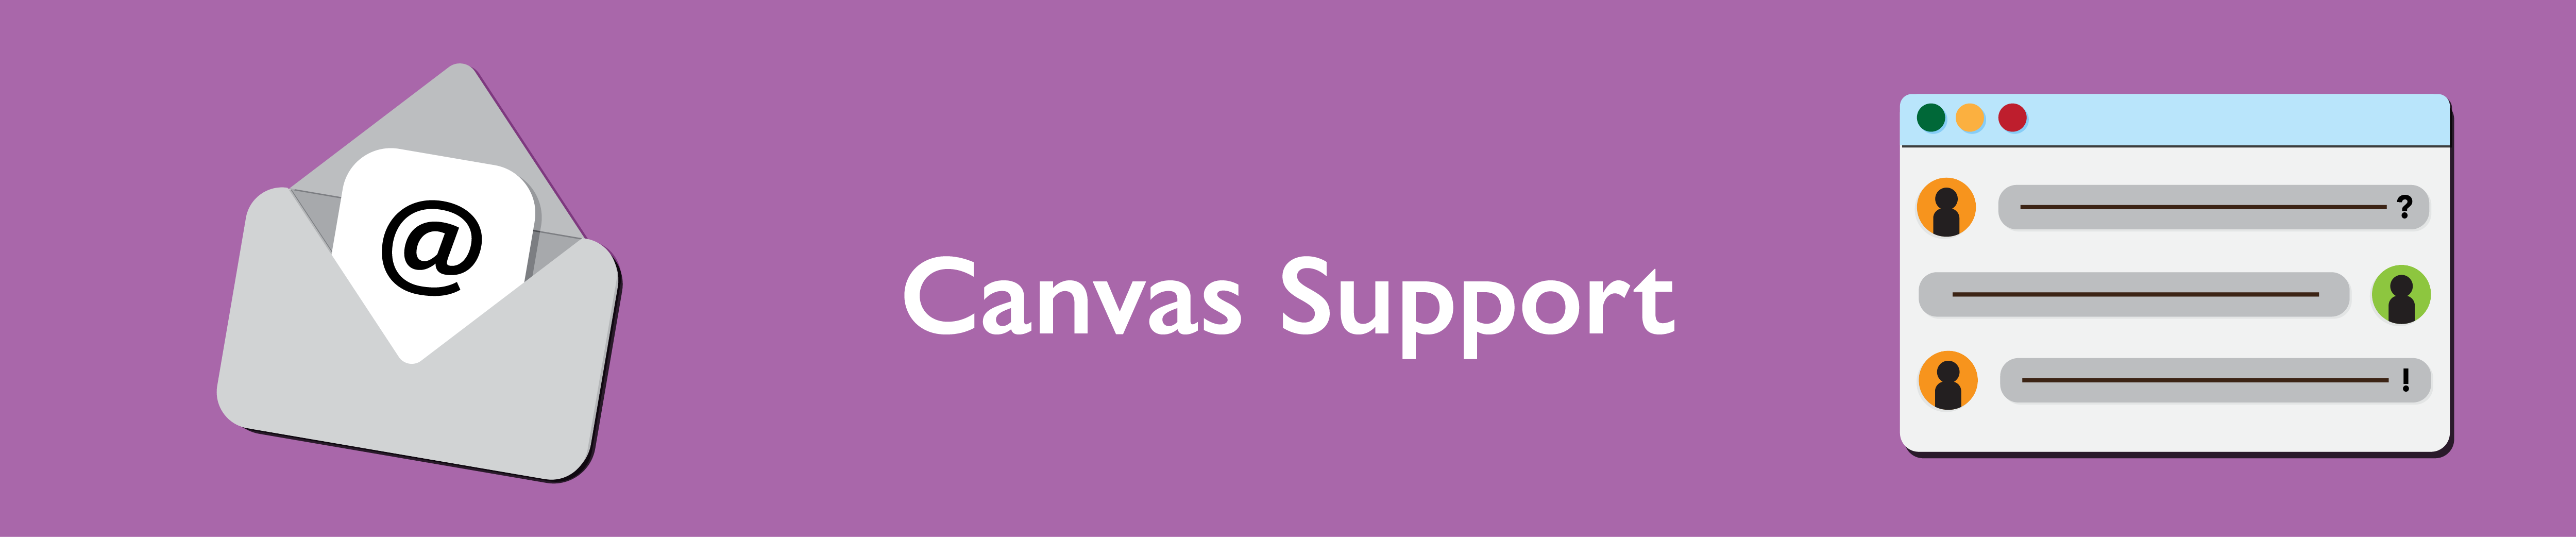 Image graphic for "canvas support"